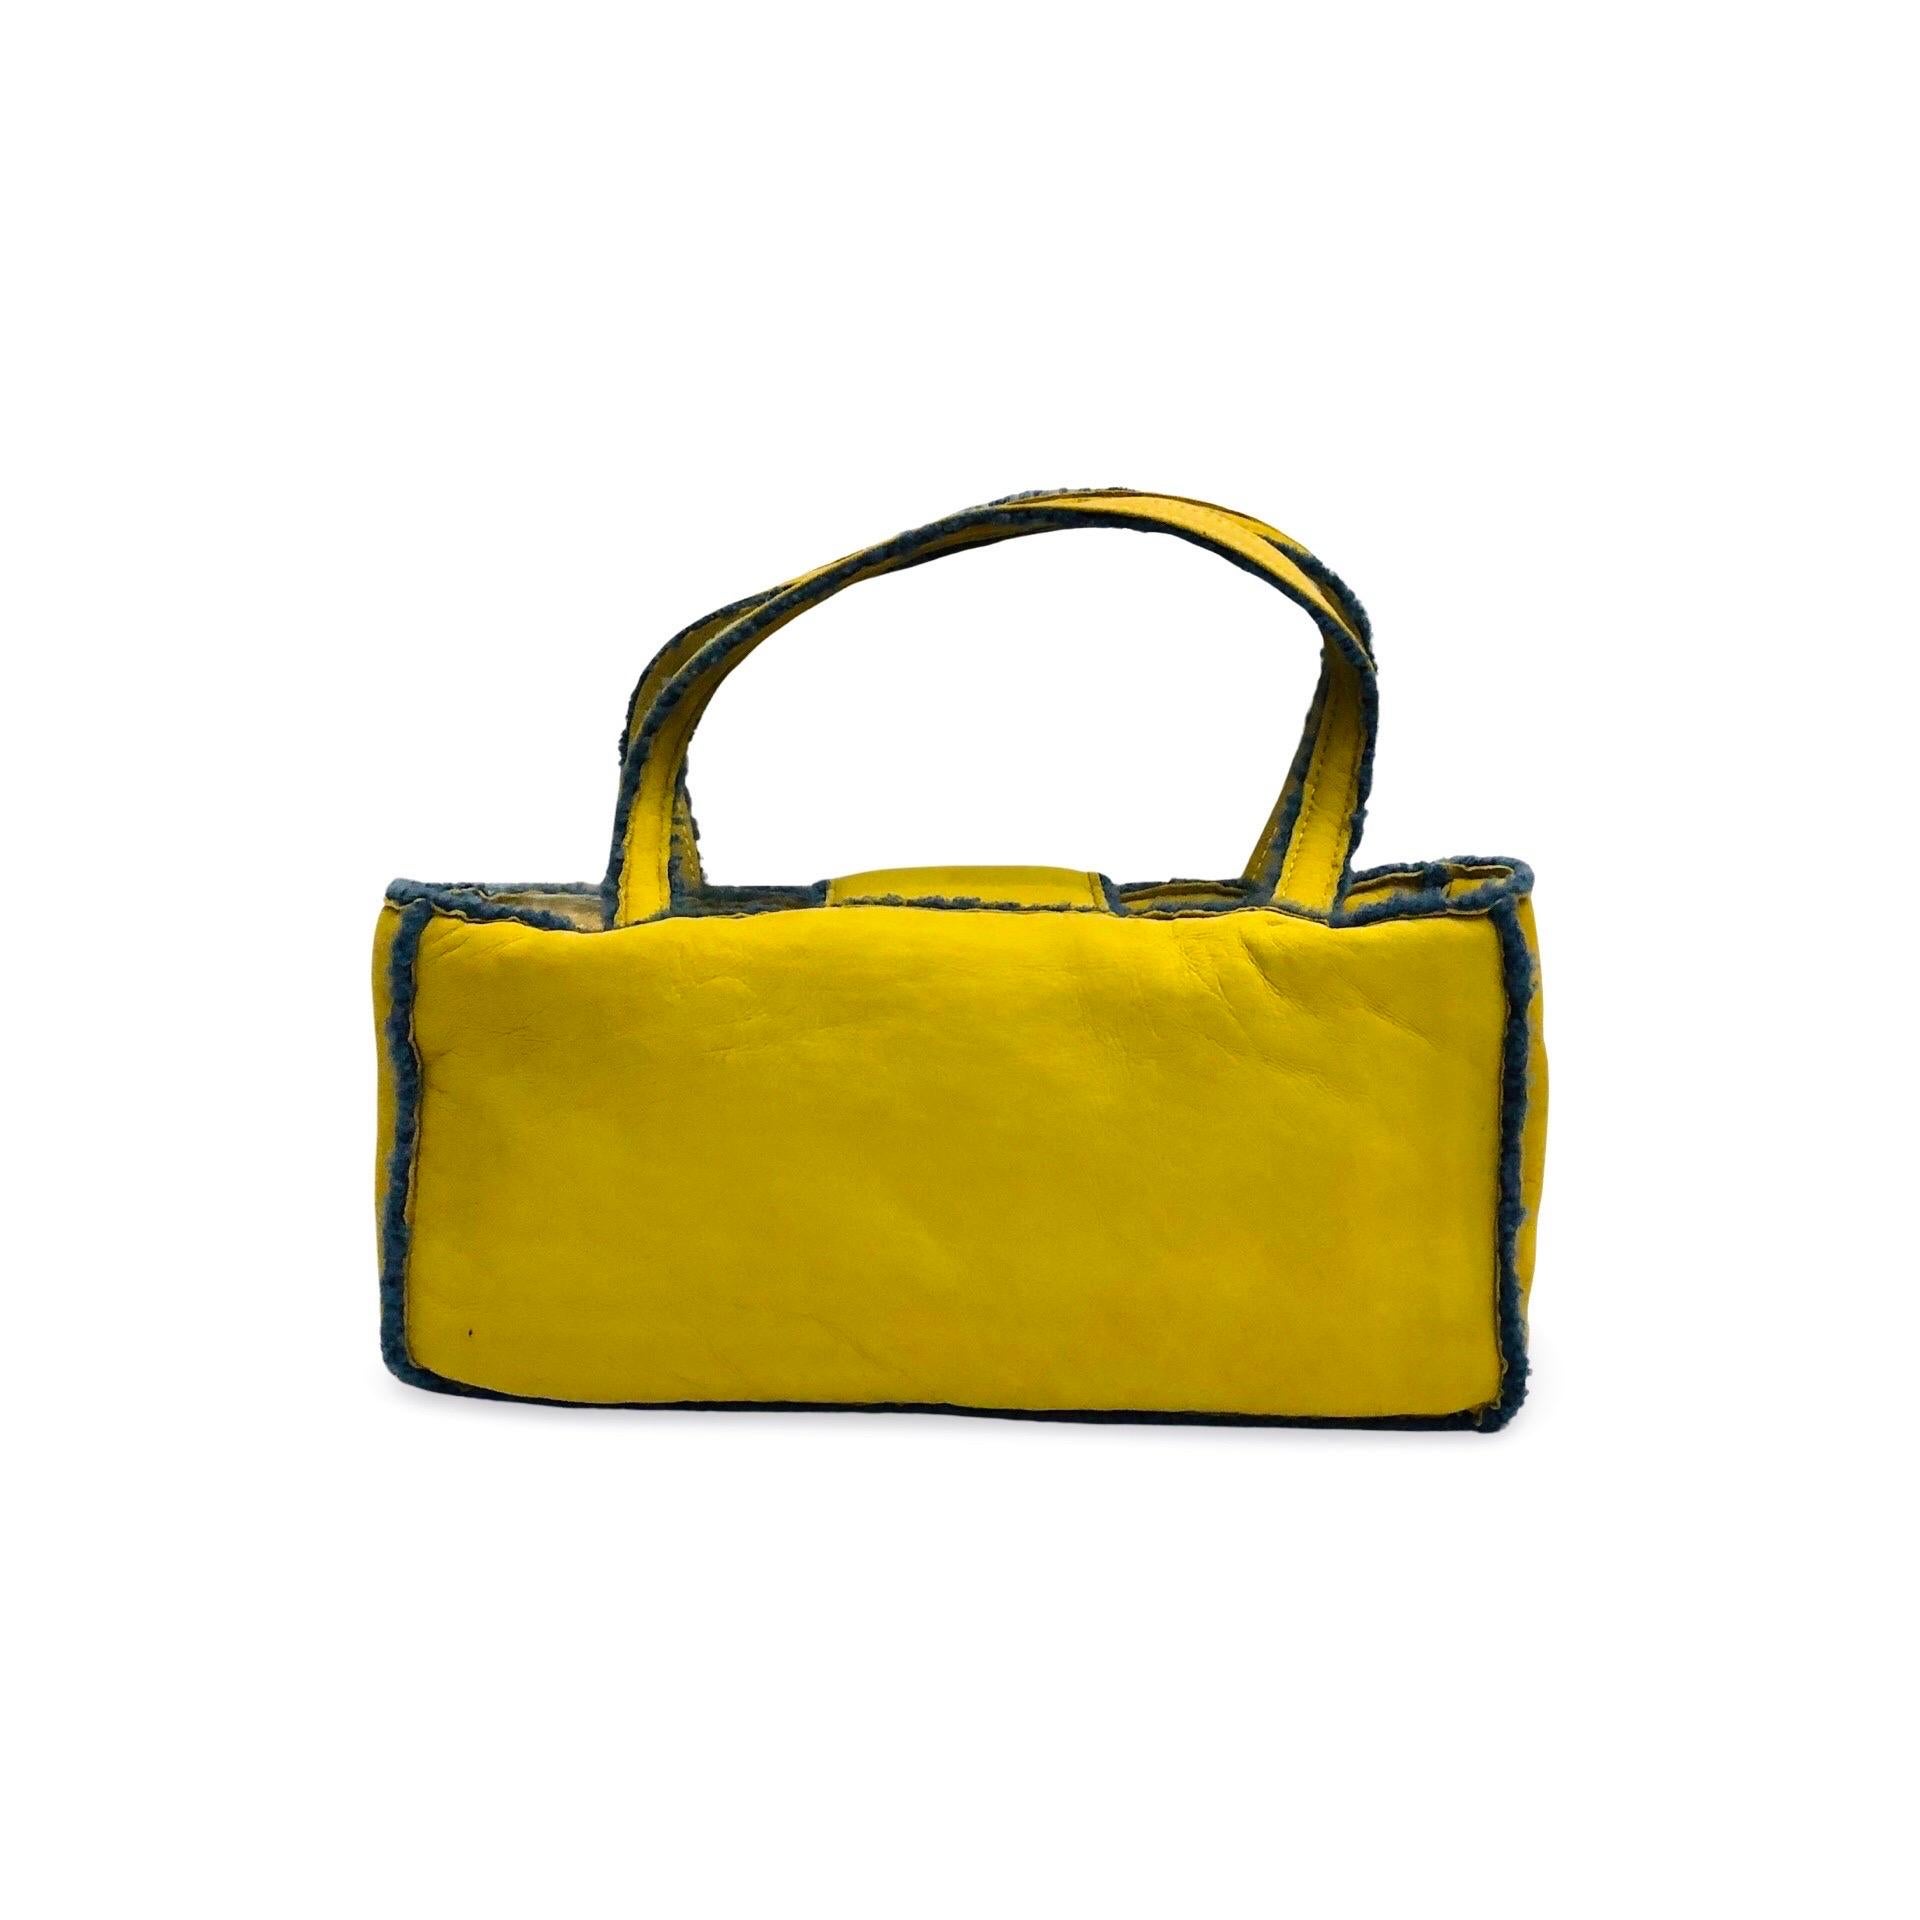 - Chanel yellow suede shoulder shoulder handbag from 1998 collection. 

- Featuring blue shearling mouton trim overall. 

- CC turnlock flap closure. 

- Interior zip pocket. 

- Length: 32cm. Height: 16cm. Width: 7.5cm. Handle Drop: 18cm